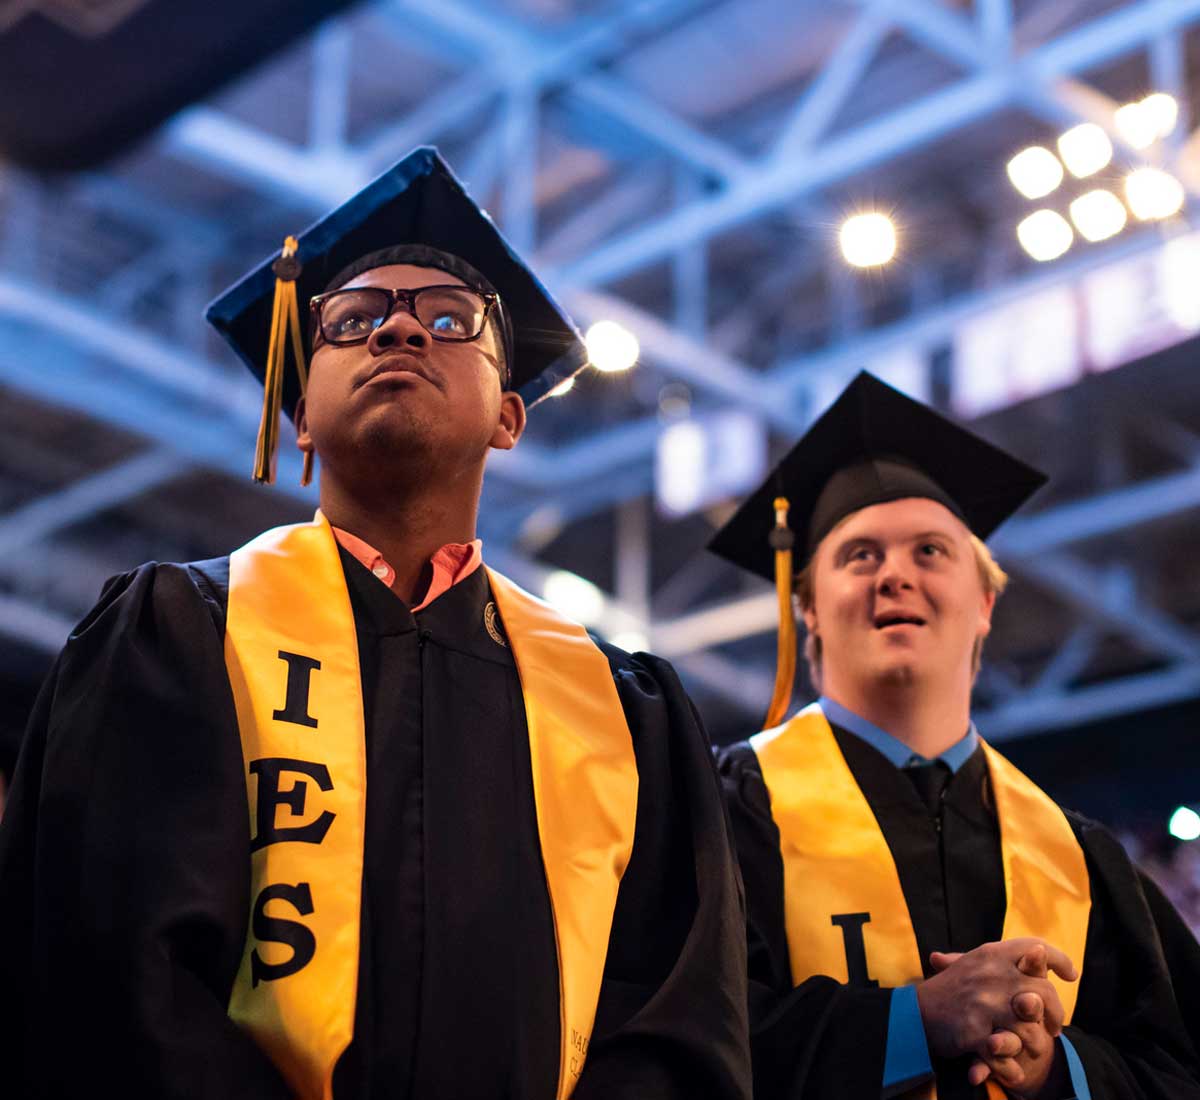 Two male graduates stand side by side in their caps and gowns